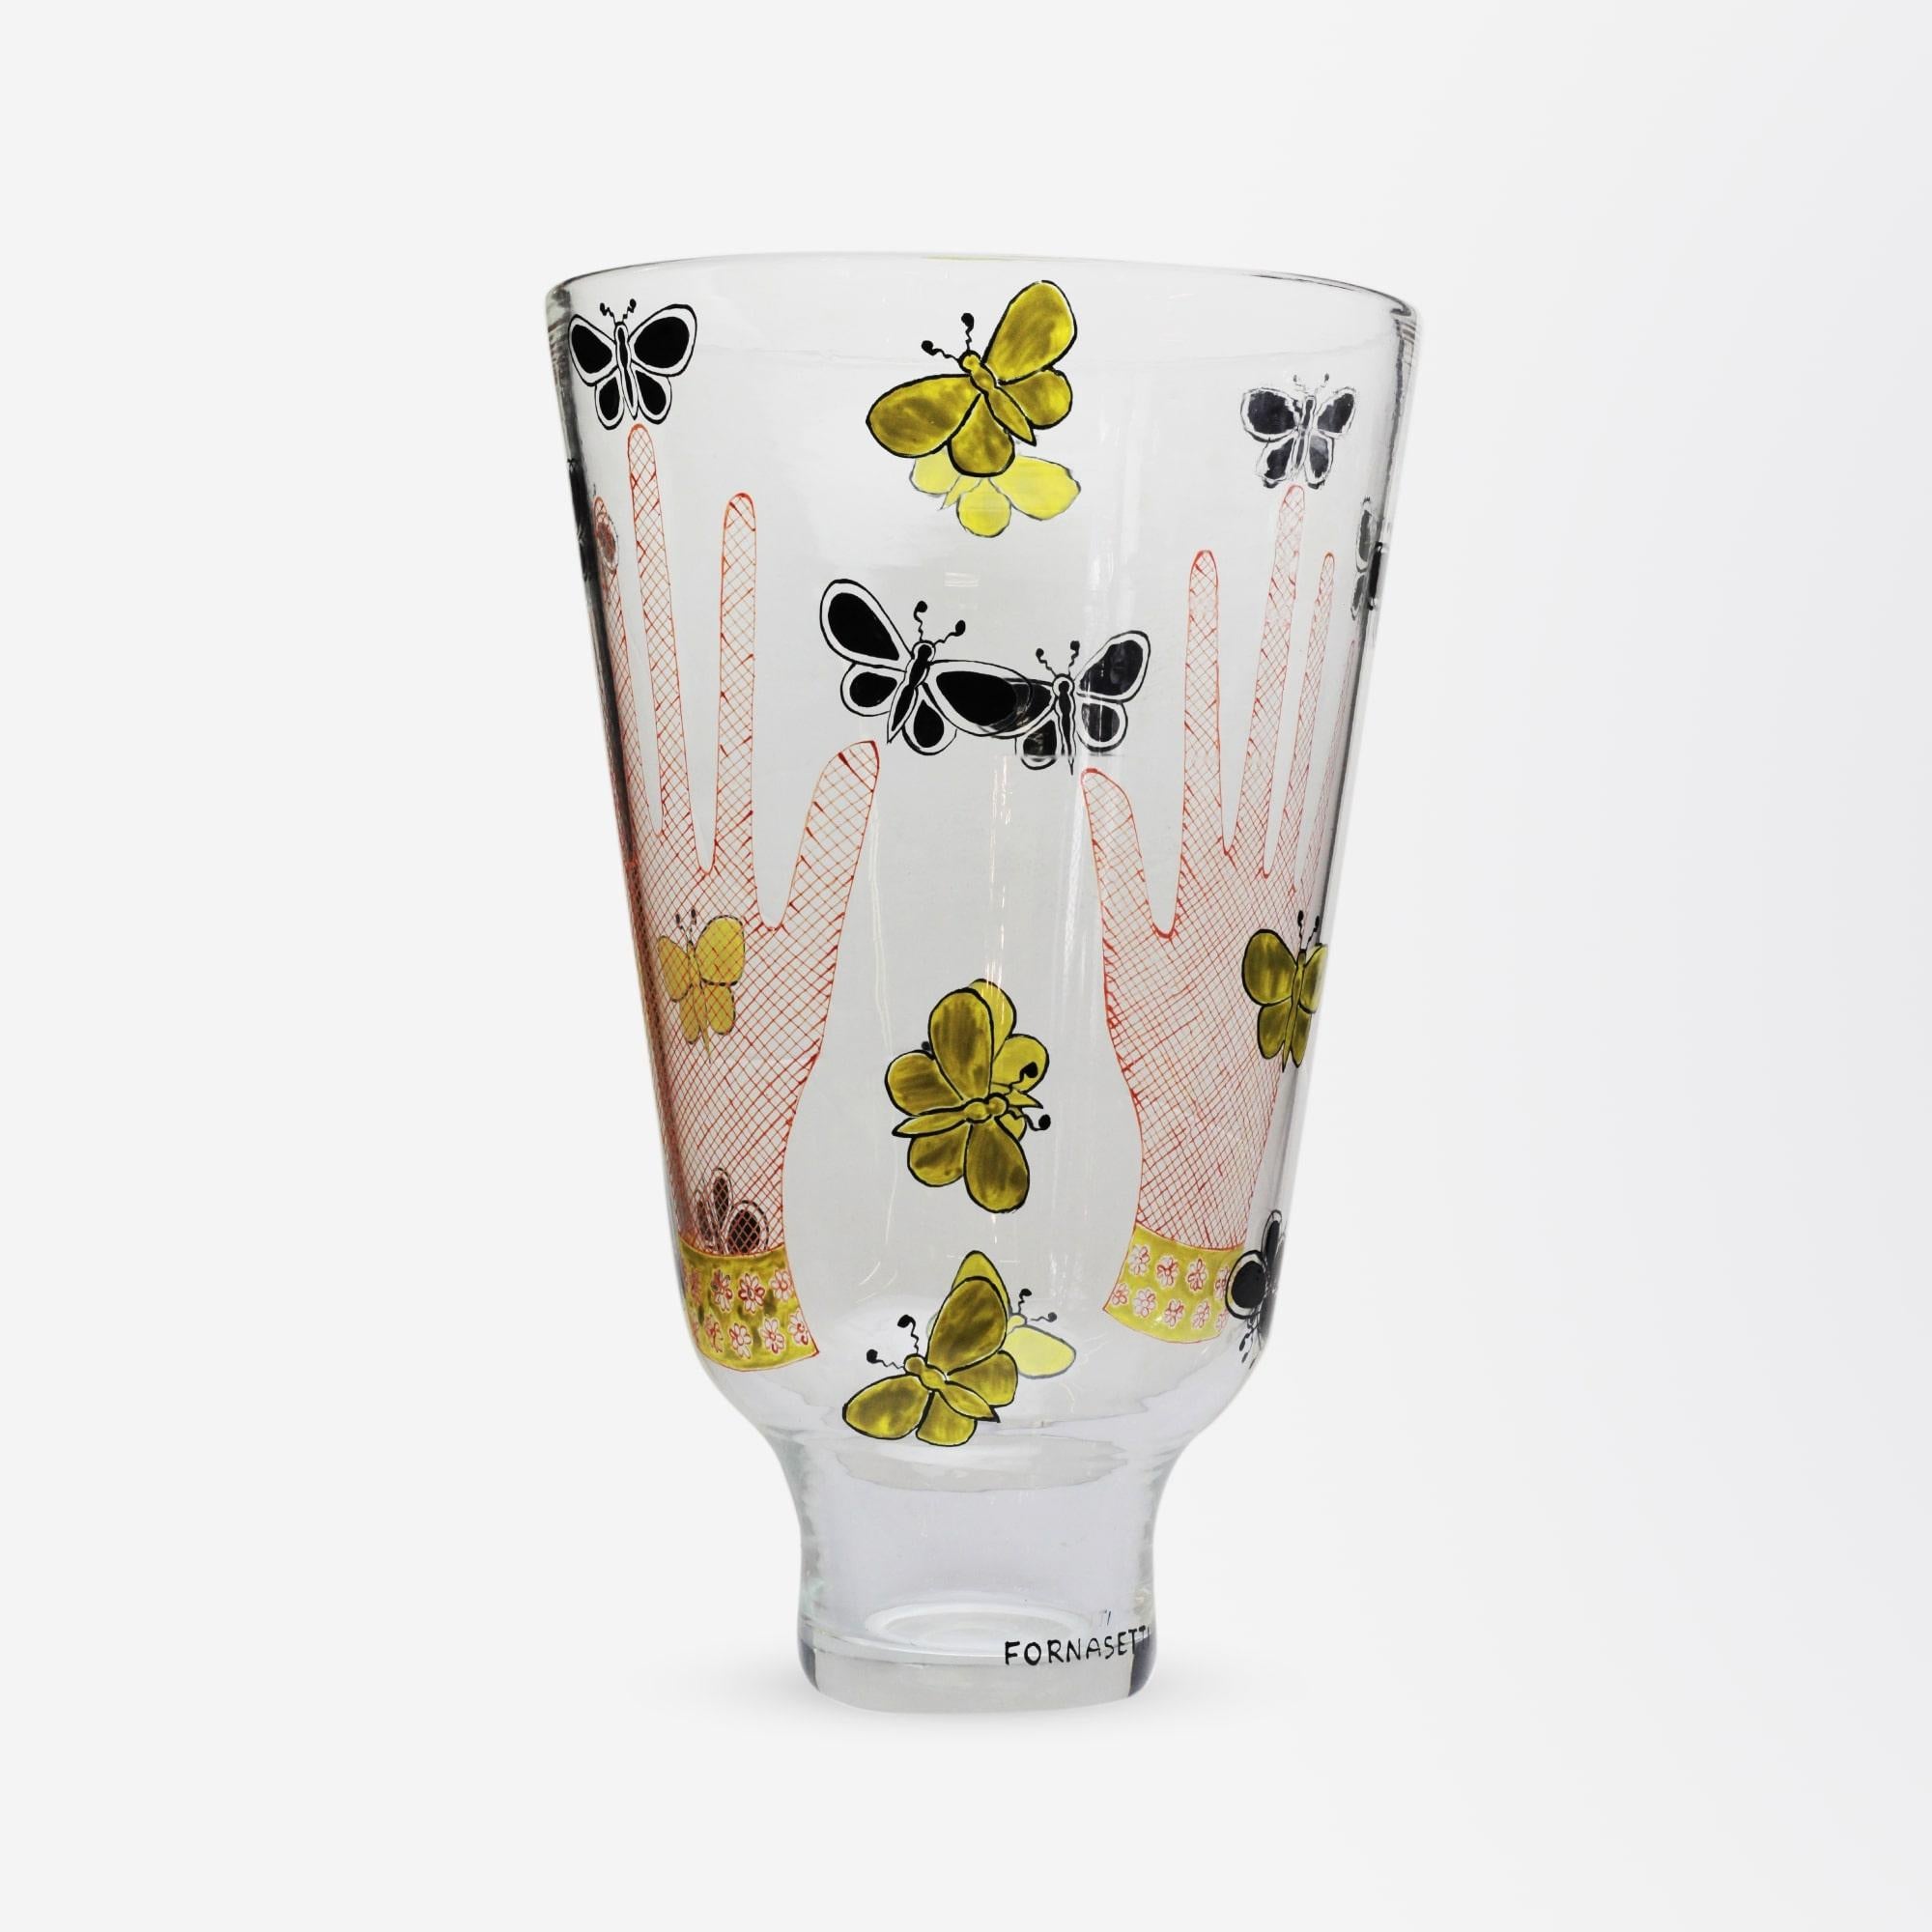 A rare, early Fornasetti glass vase, titled 'Mani Con Farfalle' (Hands with Butterflies), originally debuted at the 'VI Triennial of Venice' in 1936 through collaboration with S.A.L.I.R. - Studio Arts Labor Industrie Riunited. A museum-quality